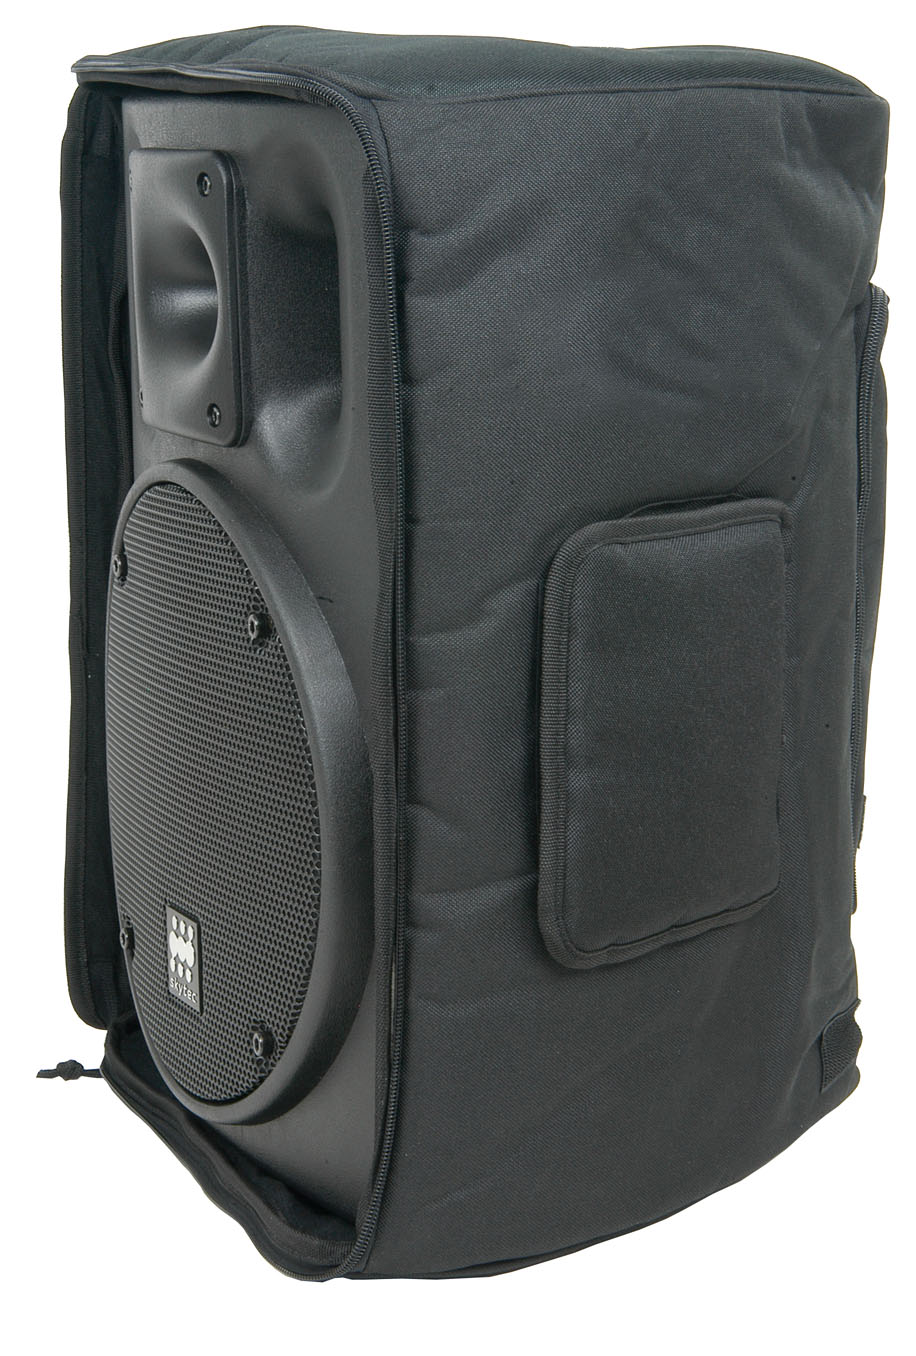 Citronic Citronic 15" Speaker Cover Protective Padded Universal Transit PA Carry CTC-15 5015972023358 